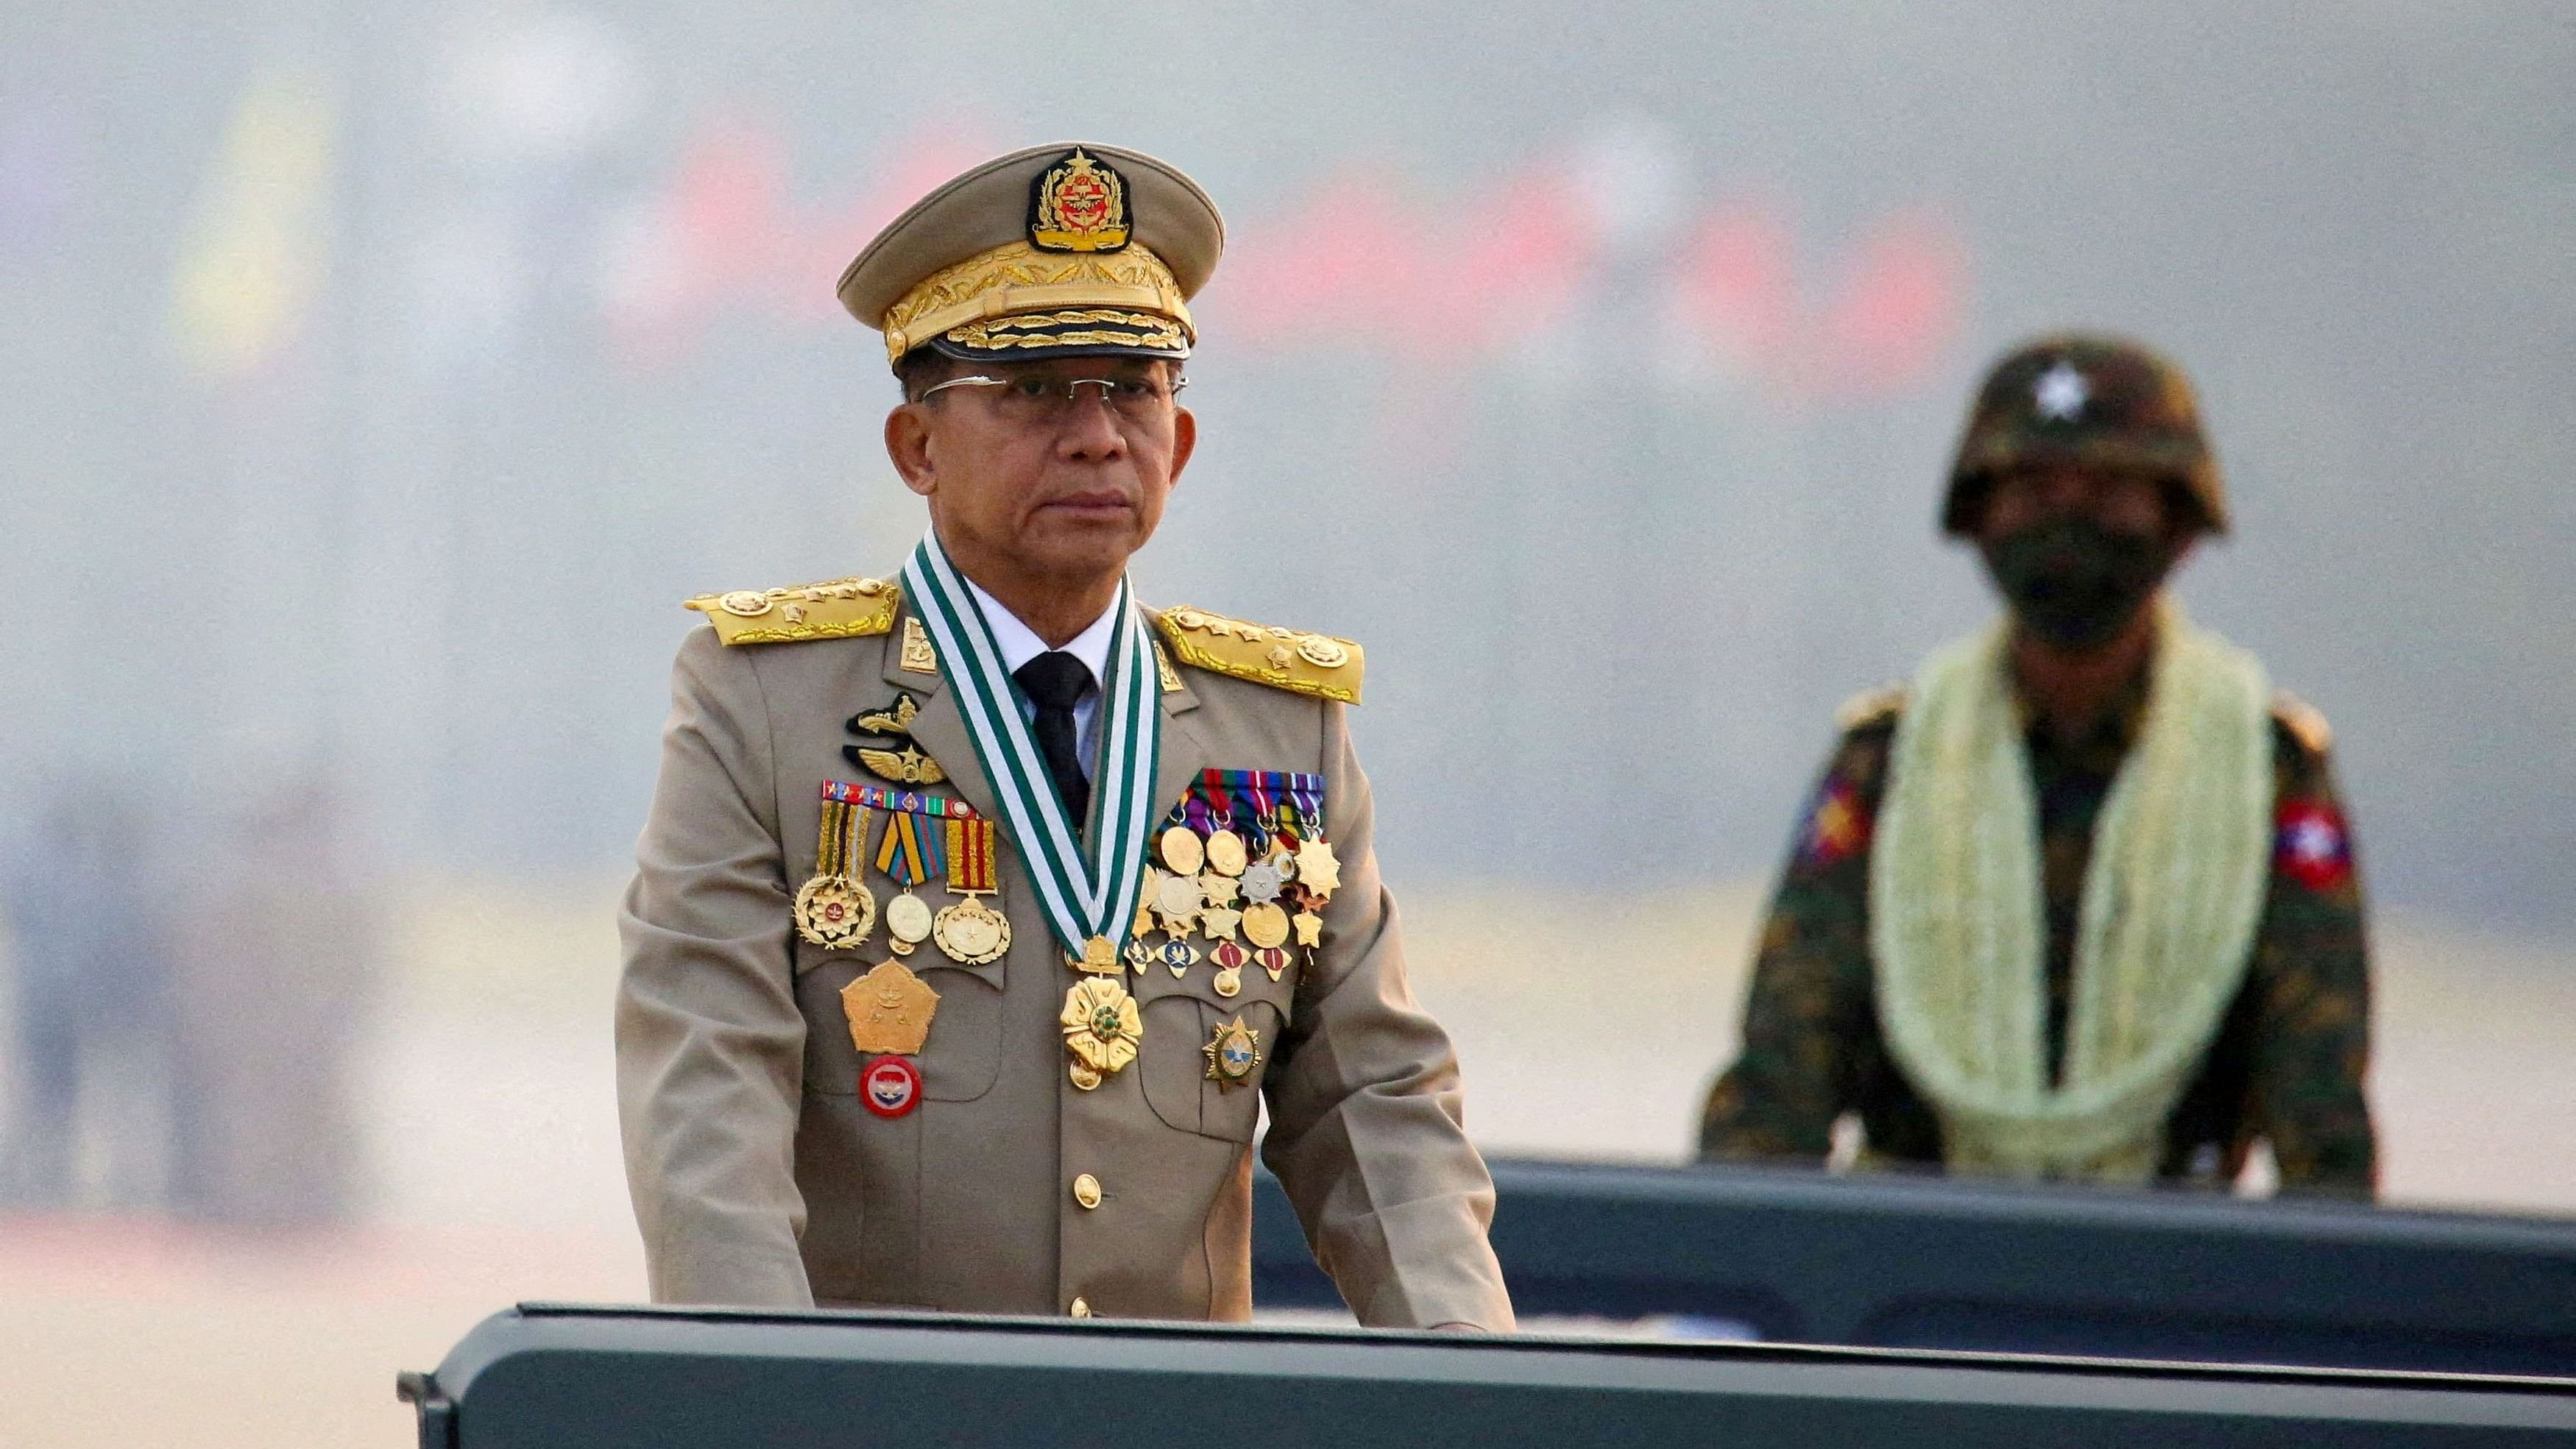 <div class="paragraphs"><p>File Photo: Myanmar's junta chief Senior General Min Aung Hlaing, who ousted the elected government in a coup on February 1, 2021, presides over an army parade on Armed Forces Day in Naypyitaw, Myanmar, March 27, 2021. </p></div>